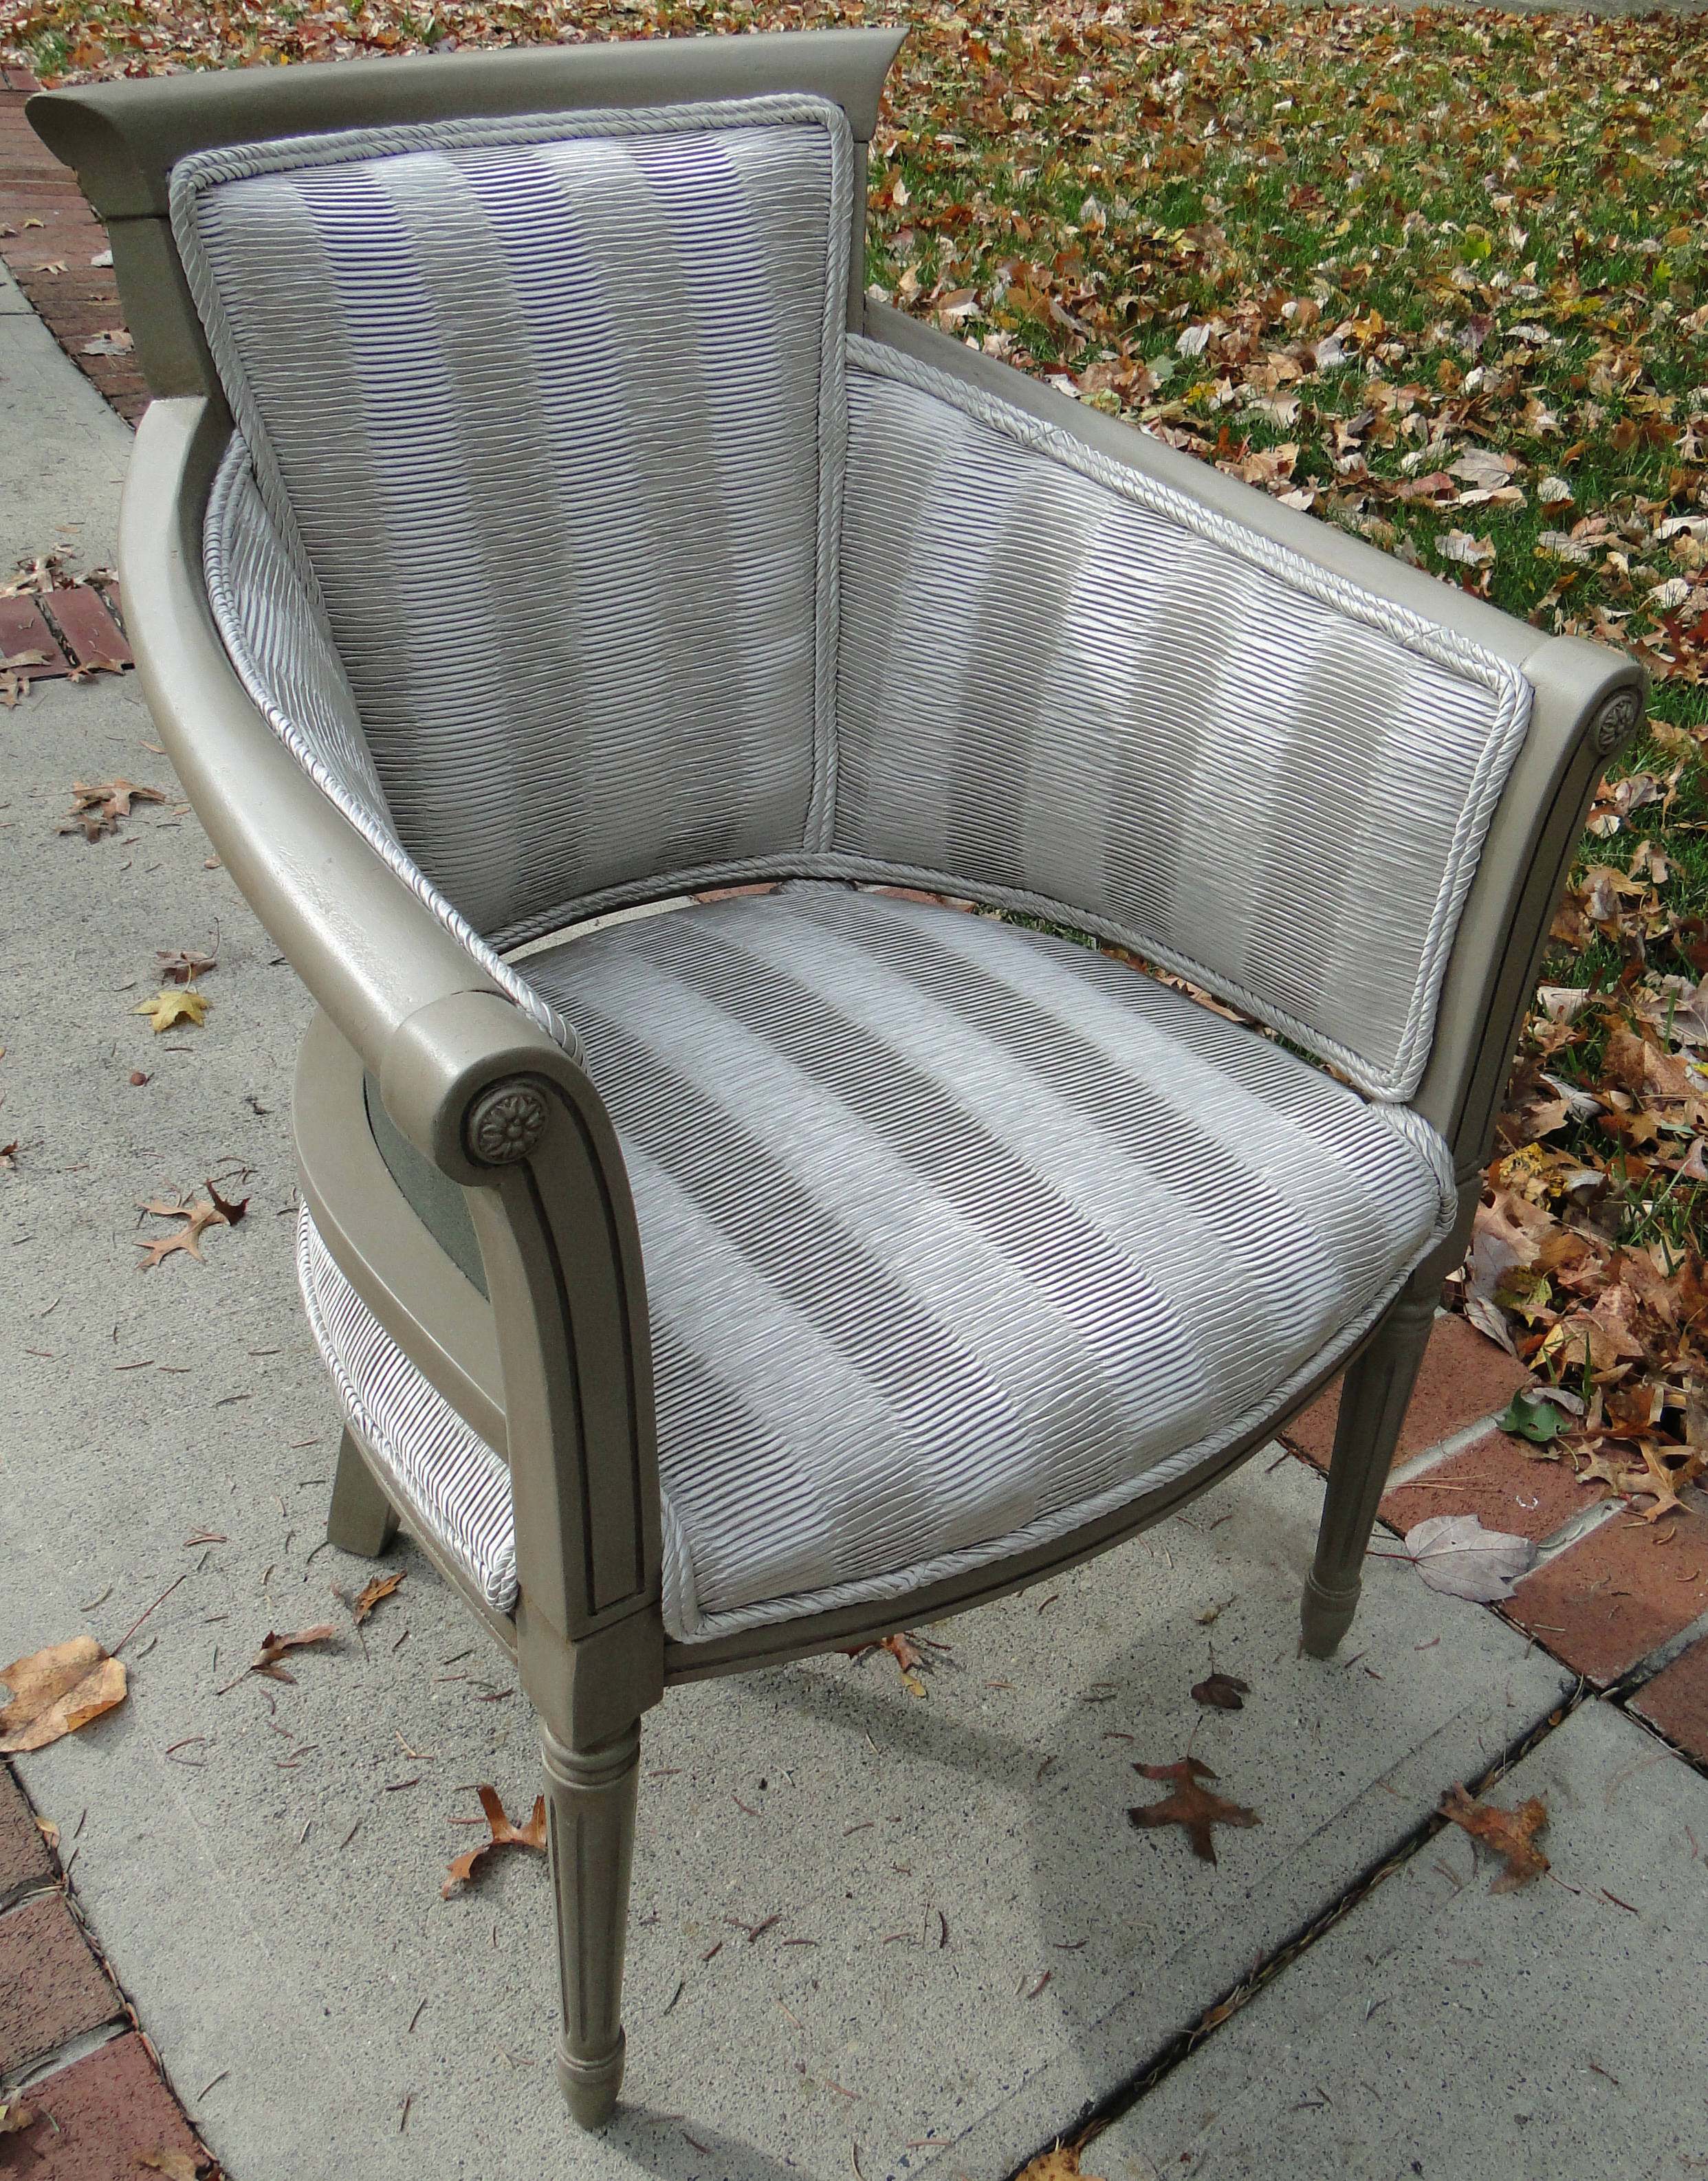 "After" view displaying stunning striped fabric with pleats